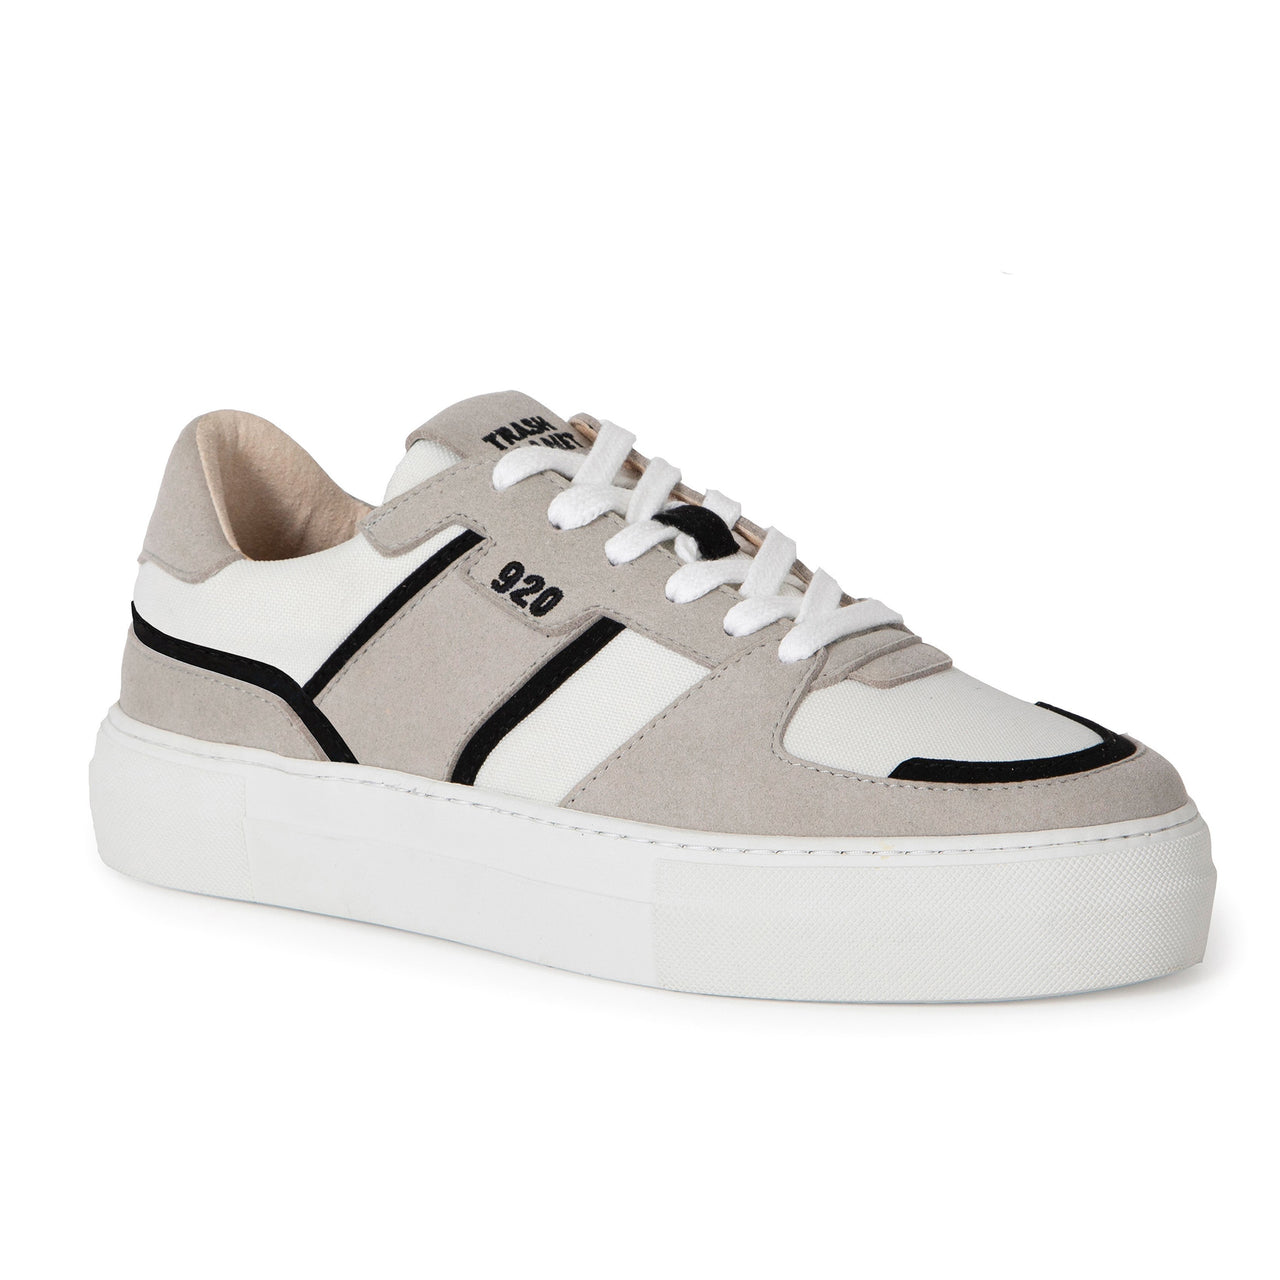 Skater style vegan sneaker in a grey, black, and white colourway made from recycled plastic bottles, ocean plastic and fruit and vegetable materials